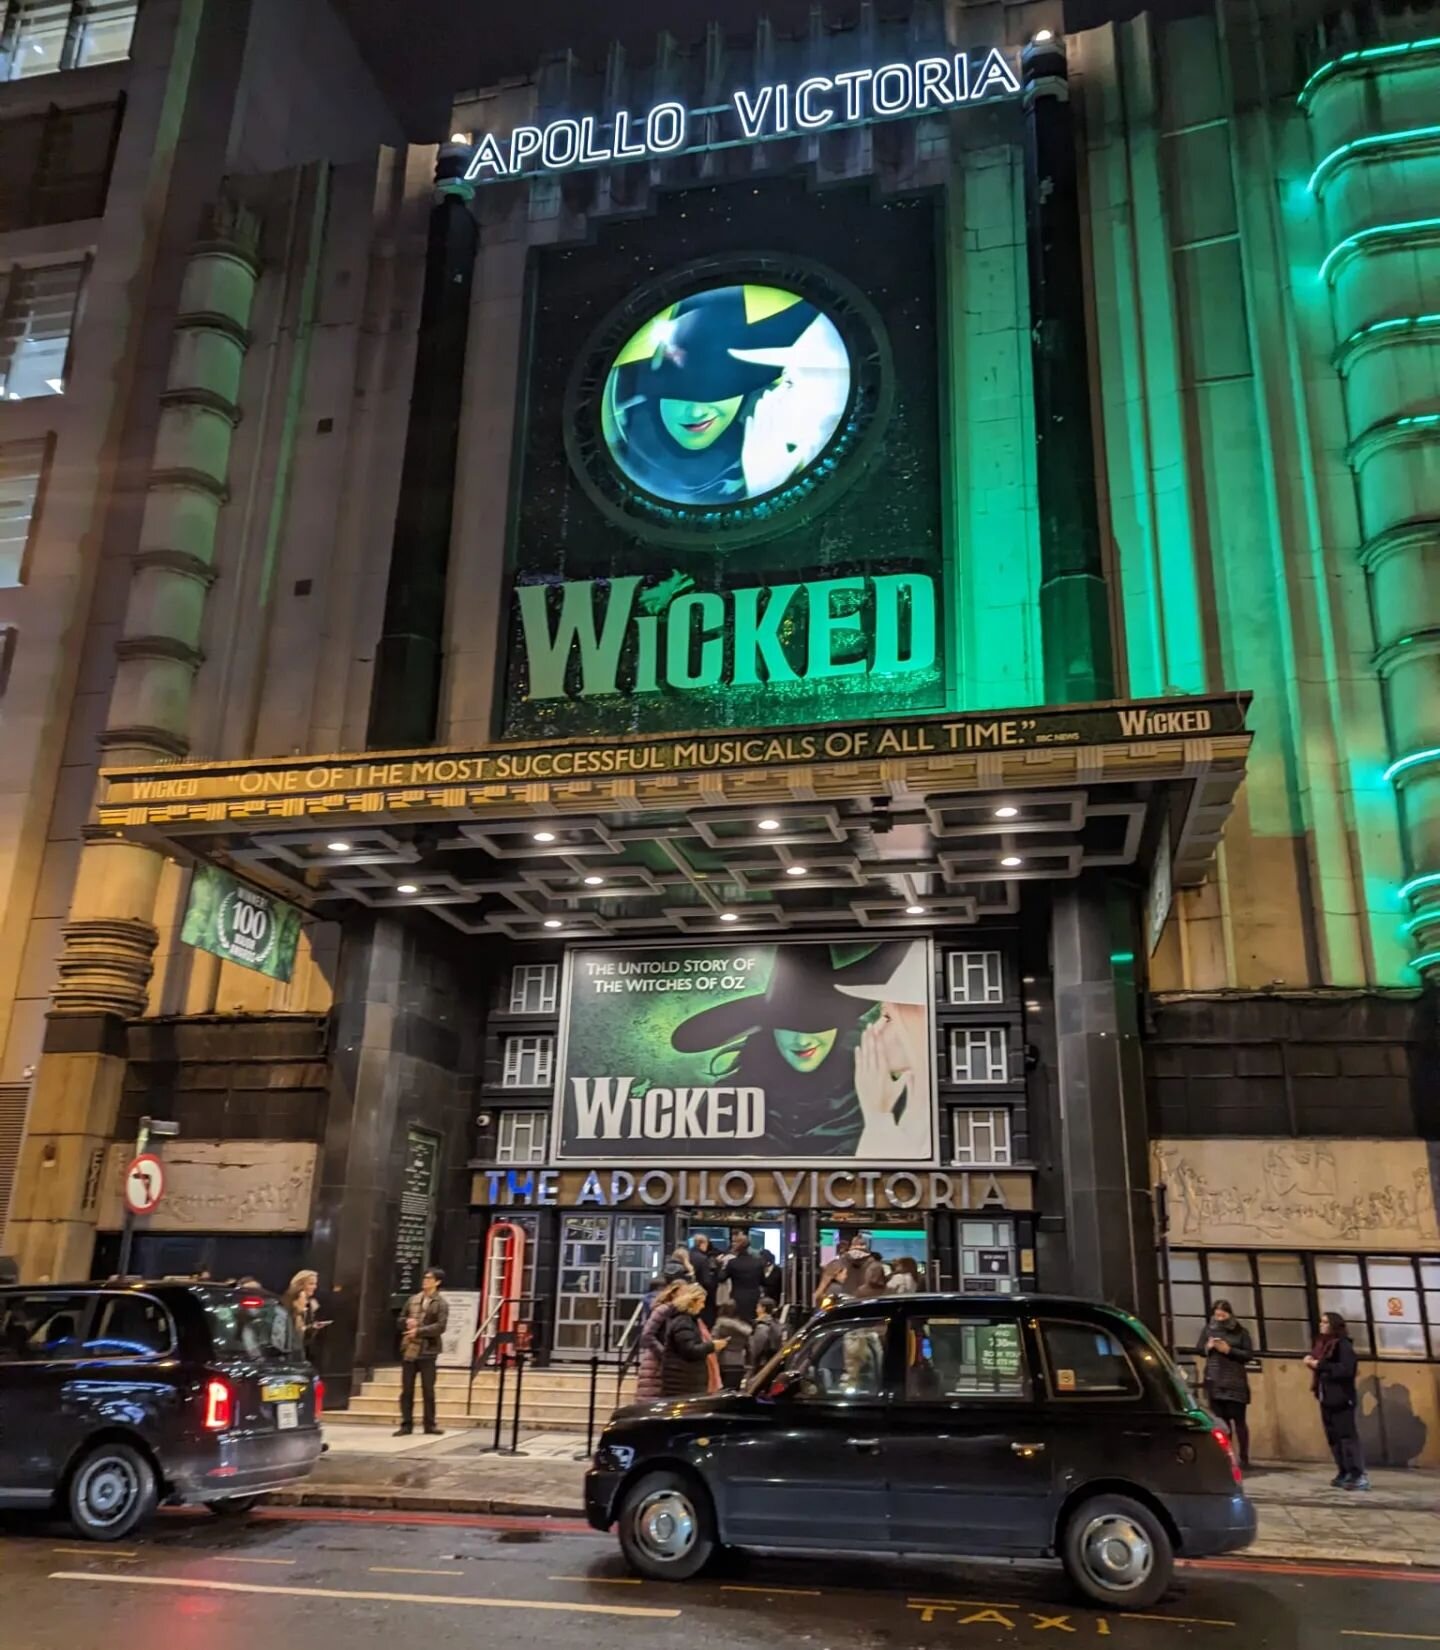 So this is where my recording adventure started - with Defying Gravity from the musical Wicked 🧙&zwj;♀️✨🎶
Currently working on my next song from Wicked - Stay tuned 😉💖
Till then: gonna enjoy these amazing artists performing 🥰

#wicked #london #r